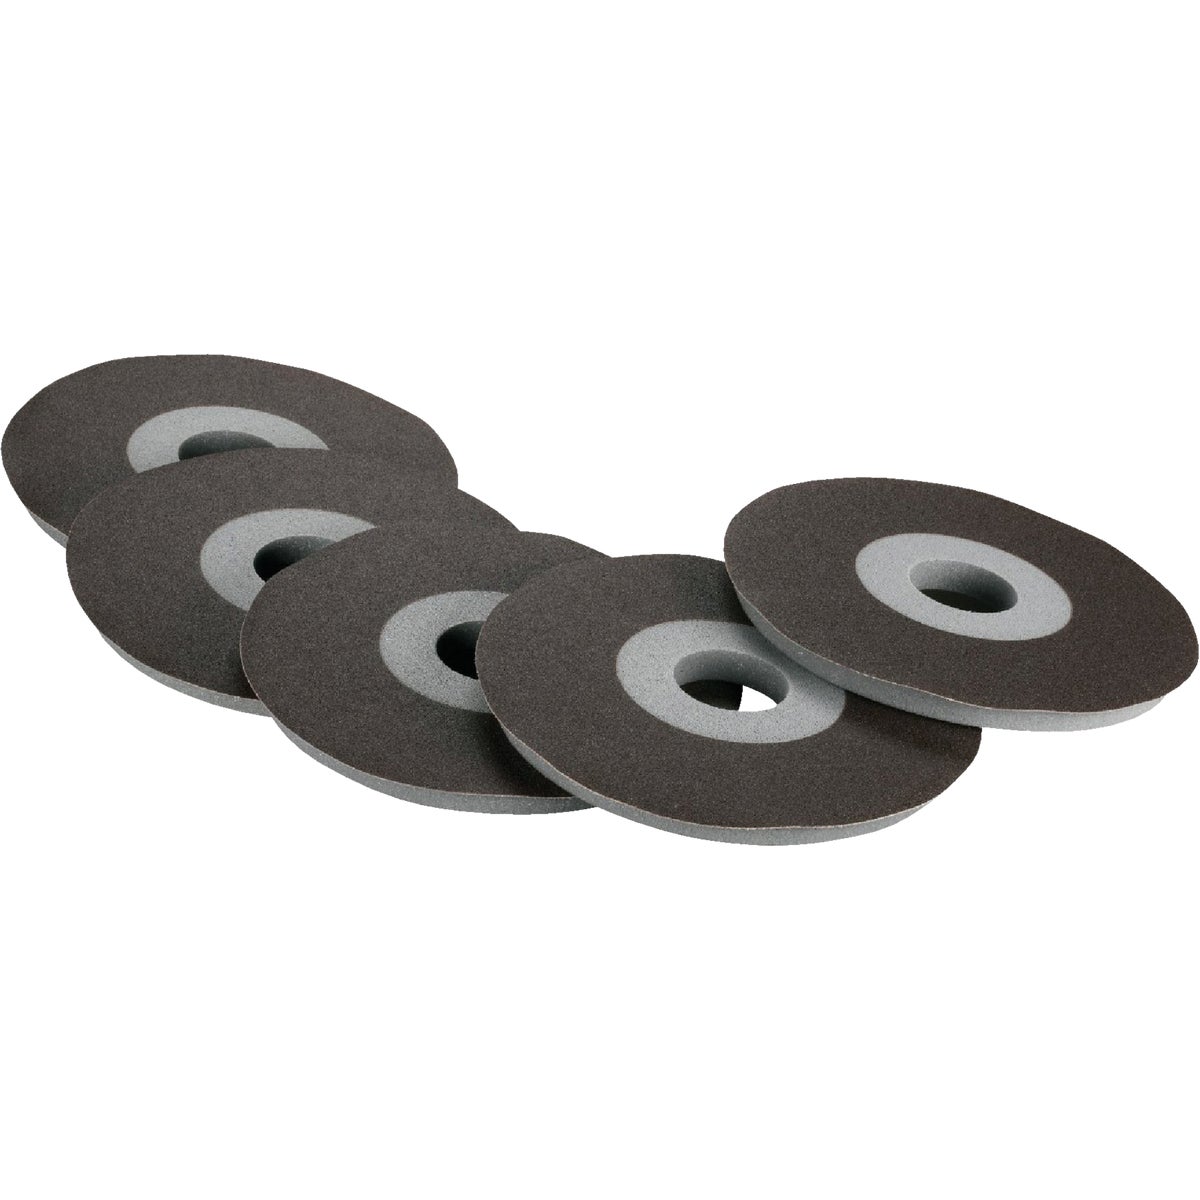 Porter Cable 8- 180 Grit Drywall Sanding Disc (5-Pack)